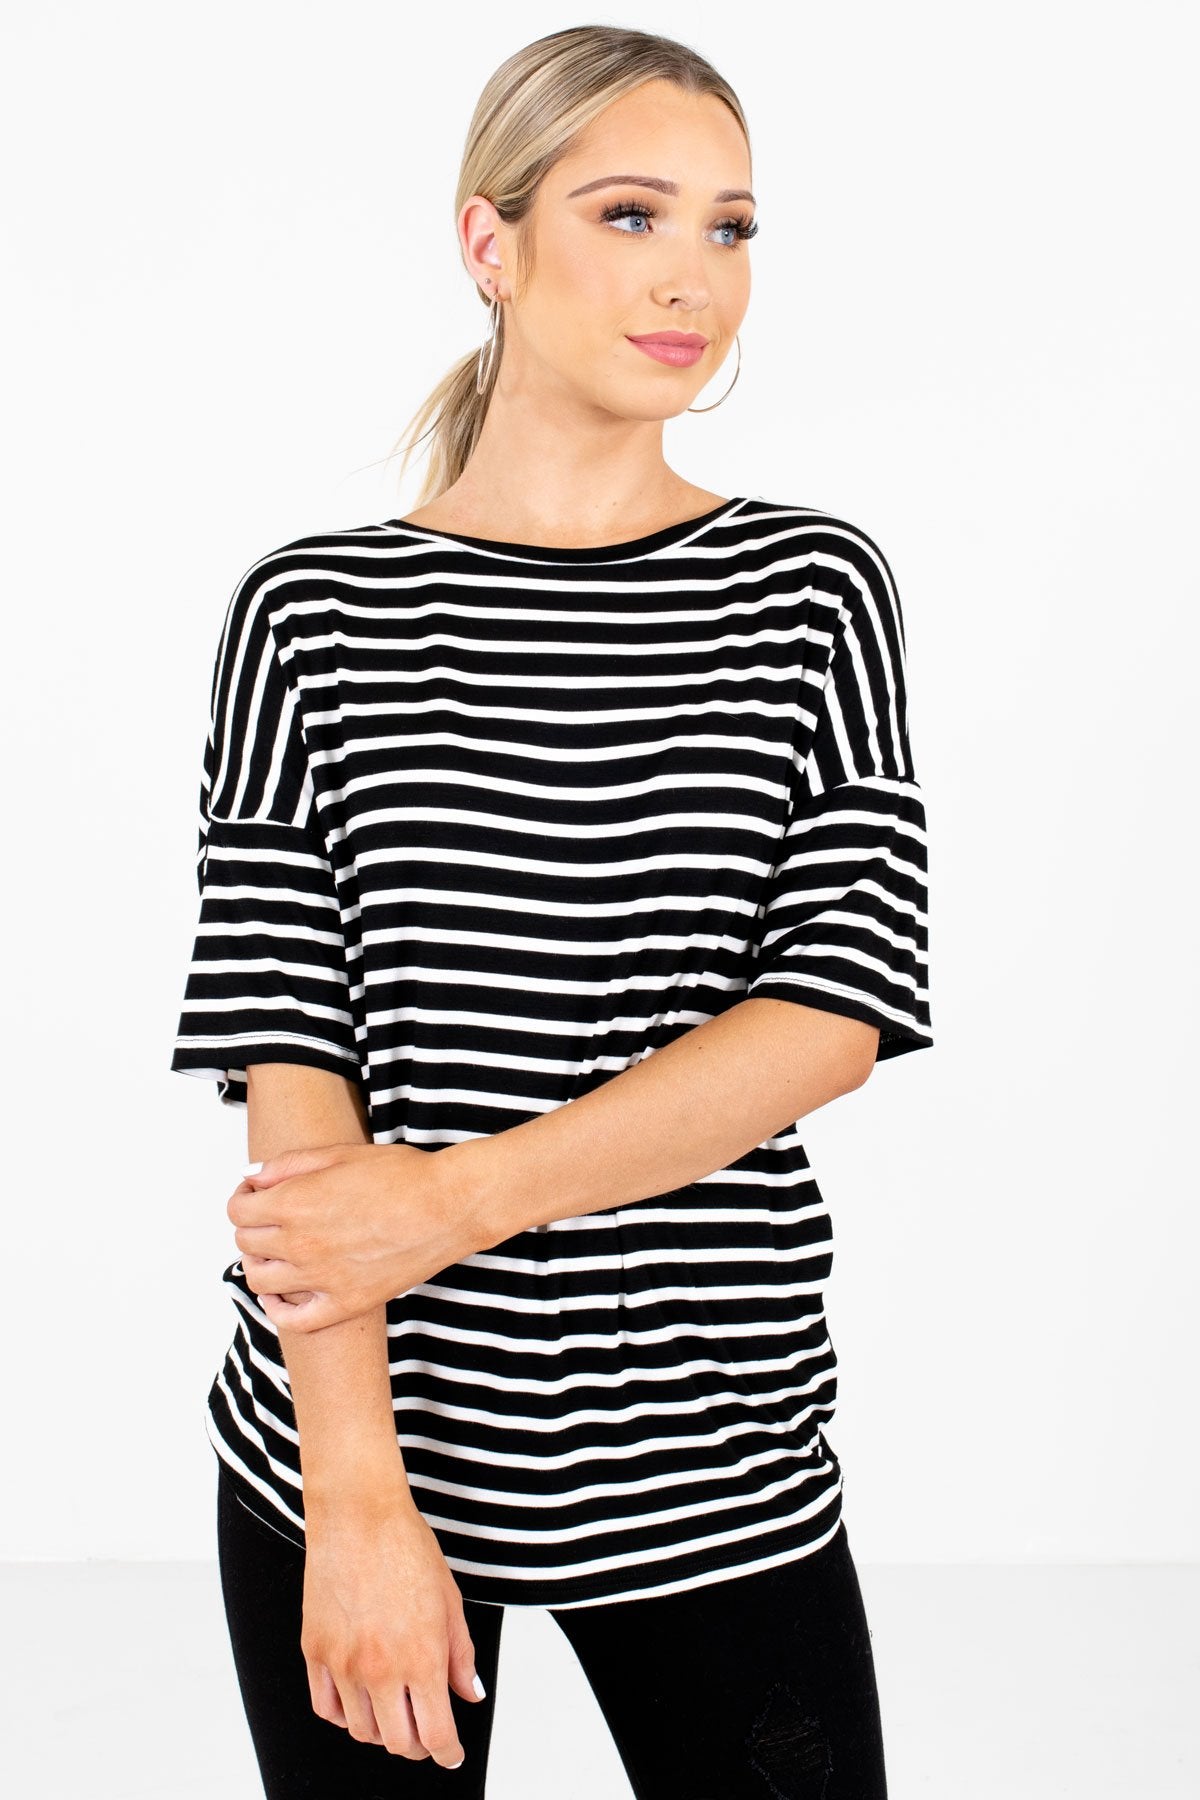 Black and White Striped Boutique Tops for Women